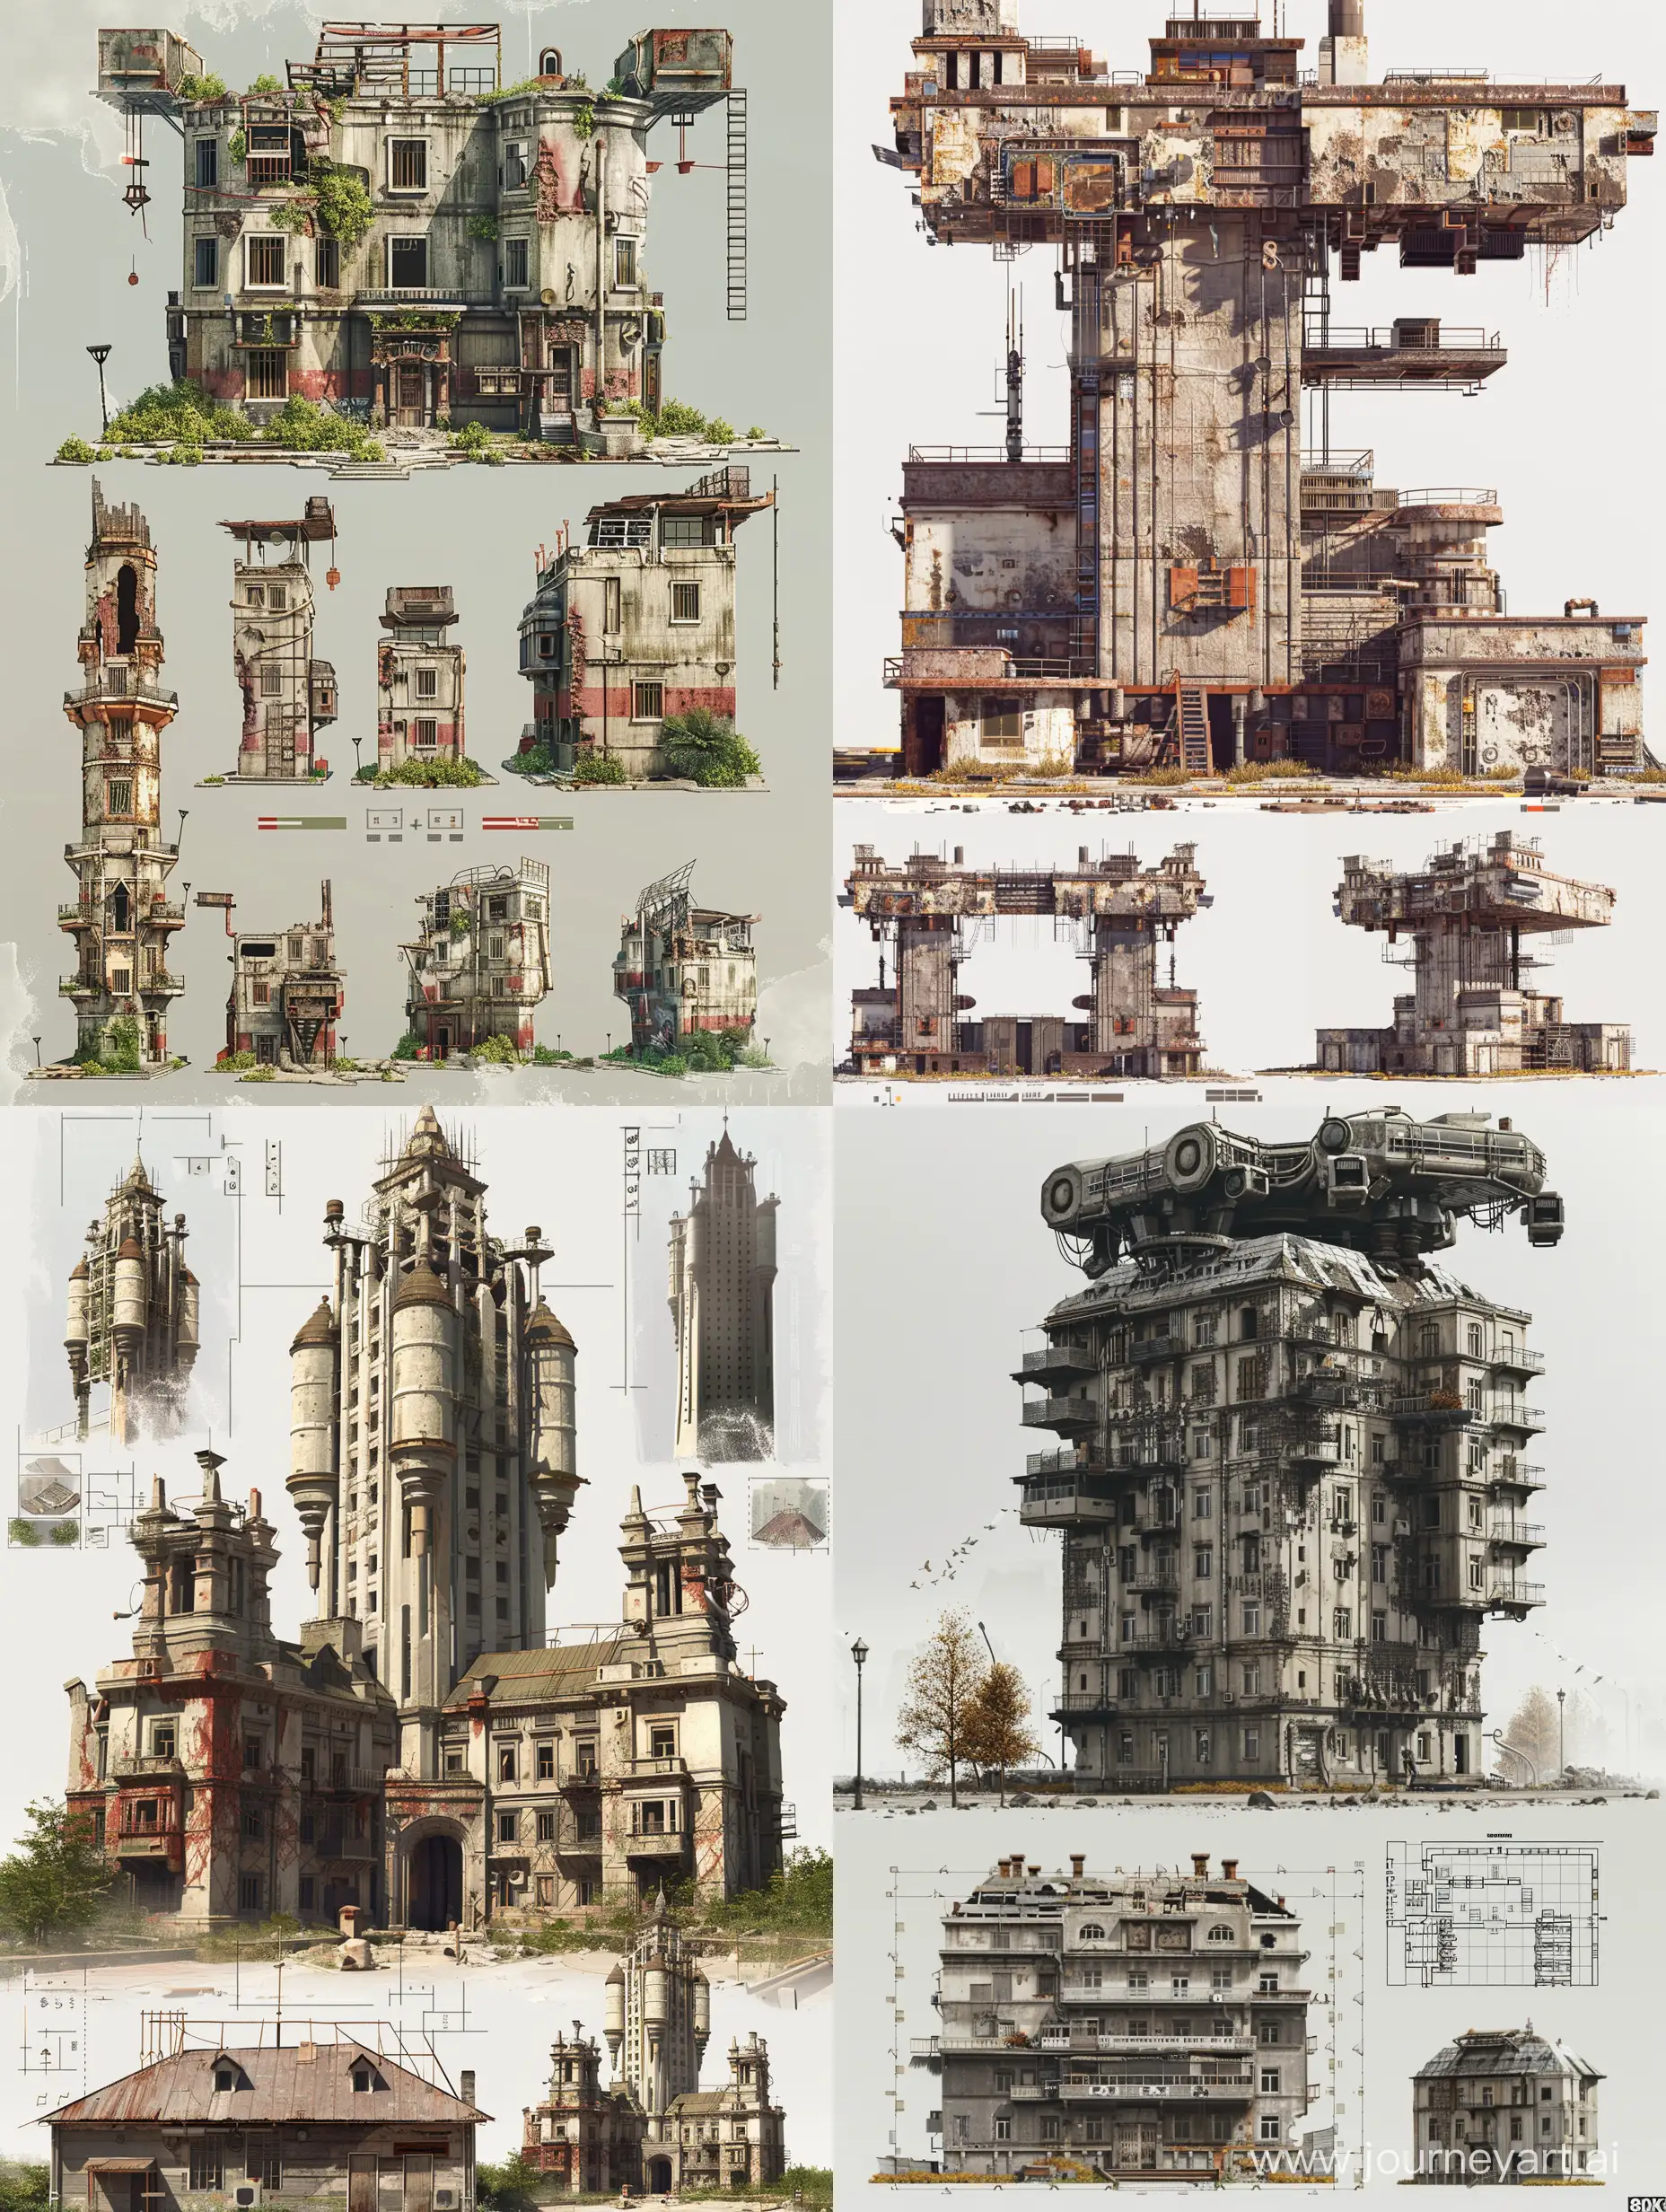 PostApocalyptic-Brutalist-Building-with-Tower-of-the-Future-and-Russian-Style-House-Sprites-for-2D-Platformer